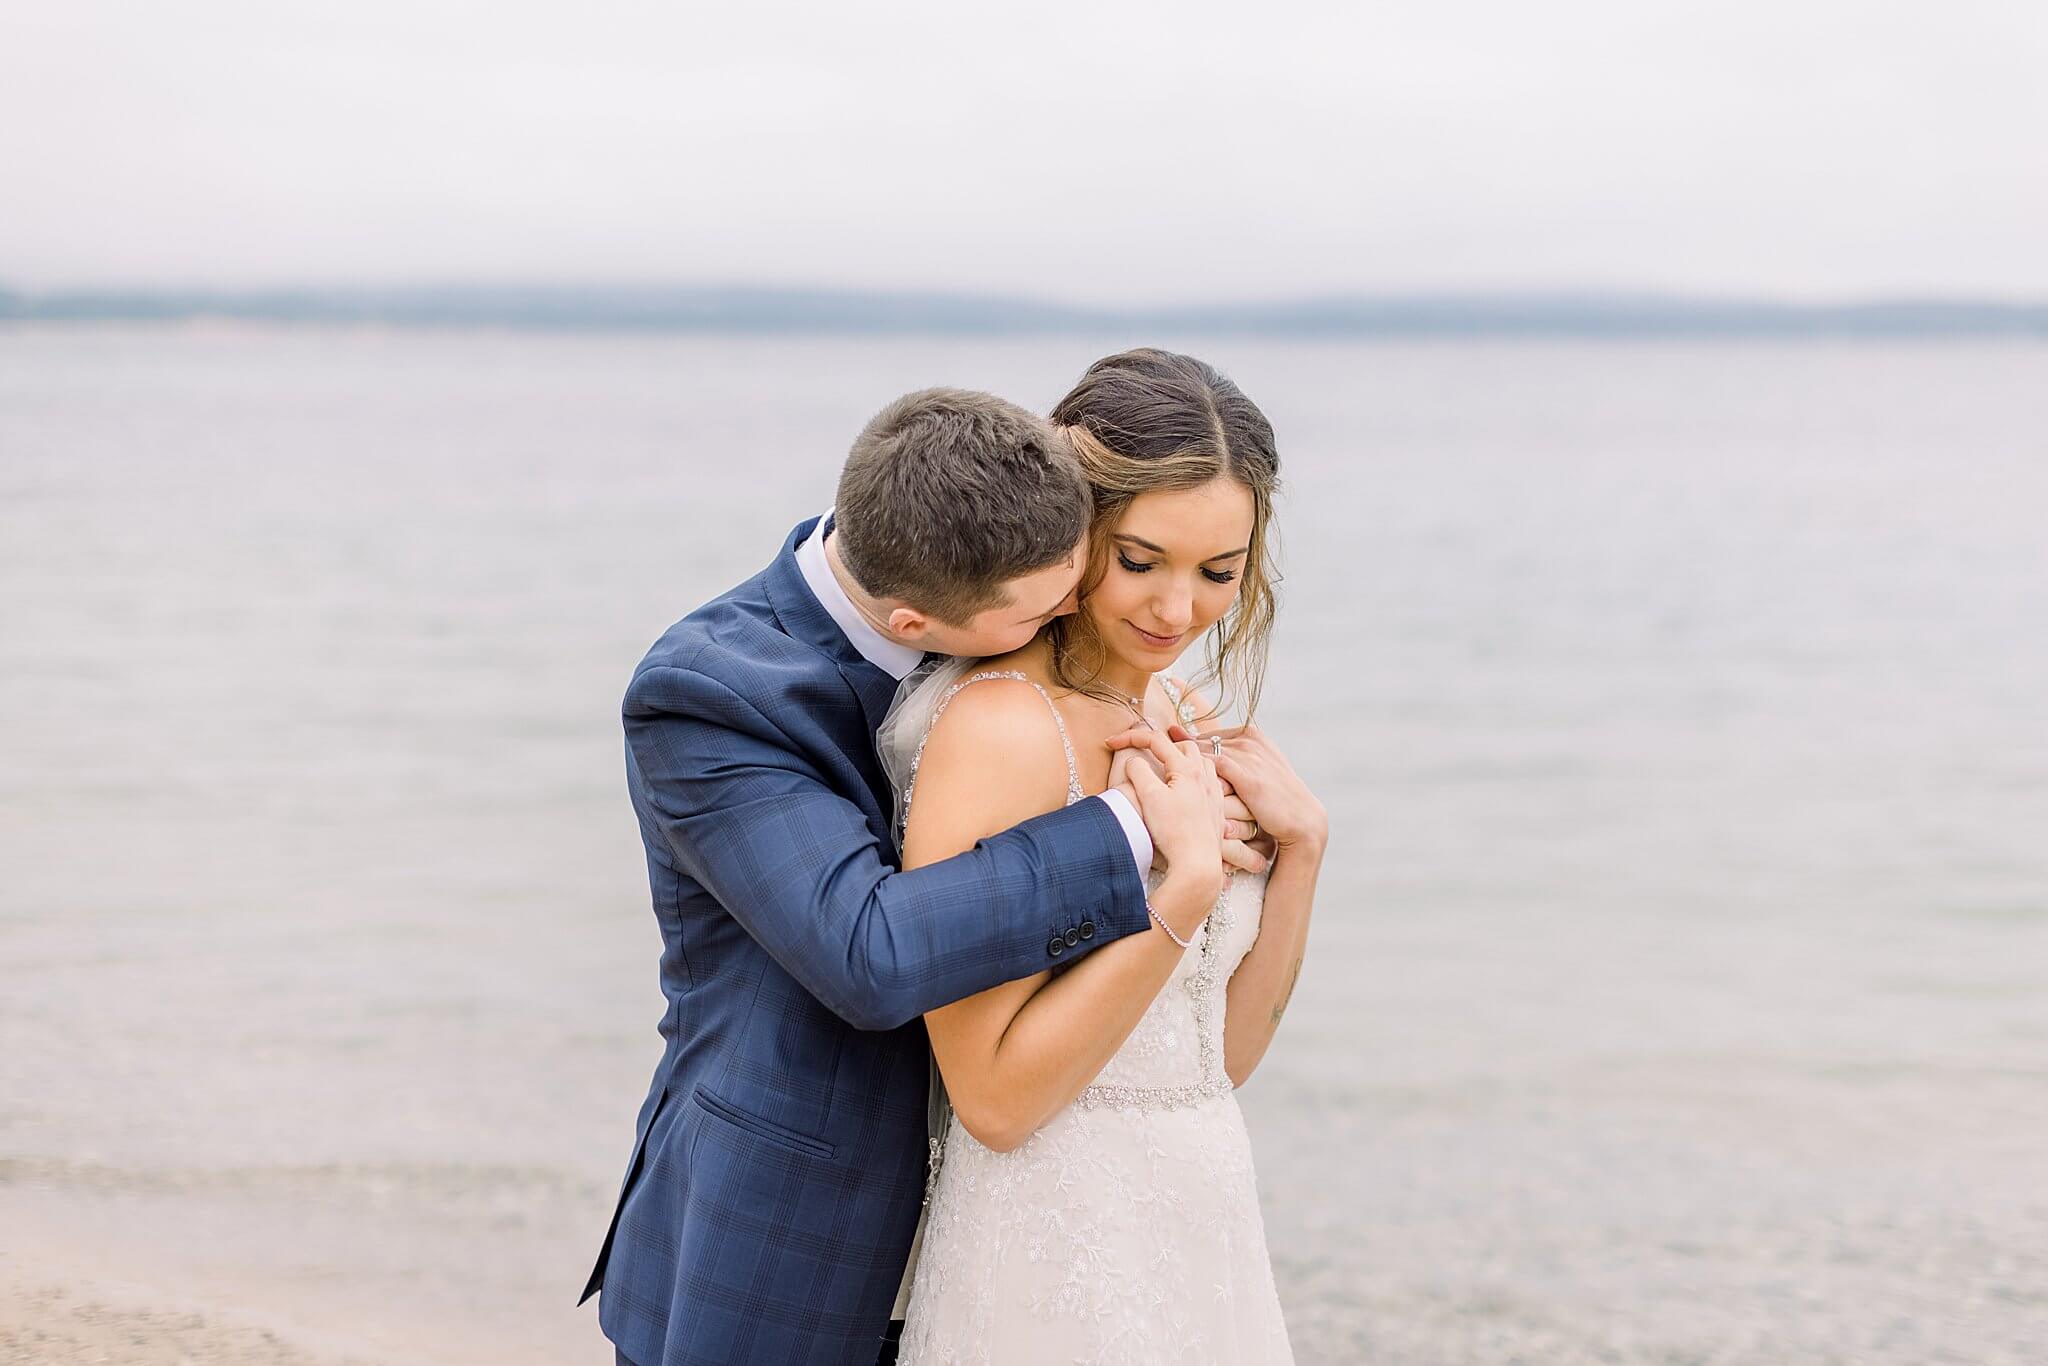 Groom kisses bride's neck during pictures on the beach for their Intimate Northern Michigan Wedding day. 